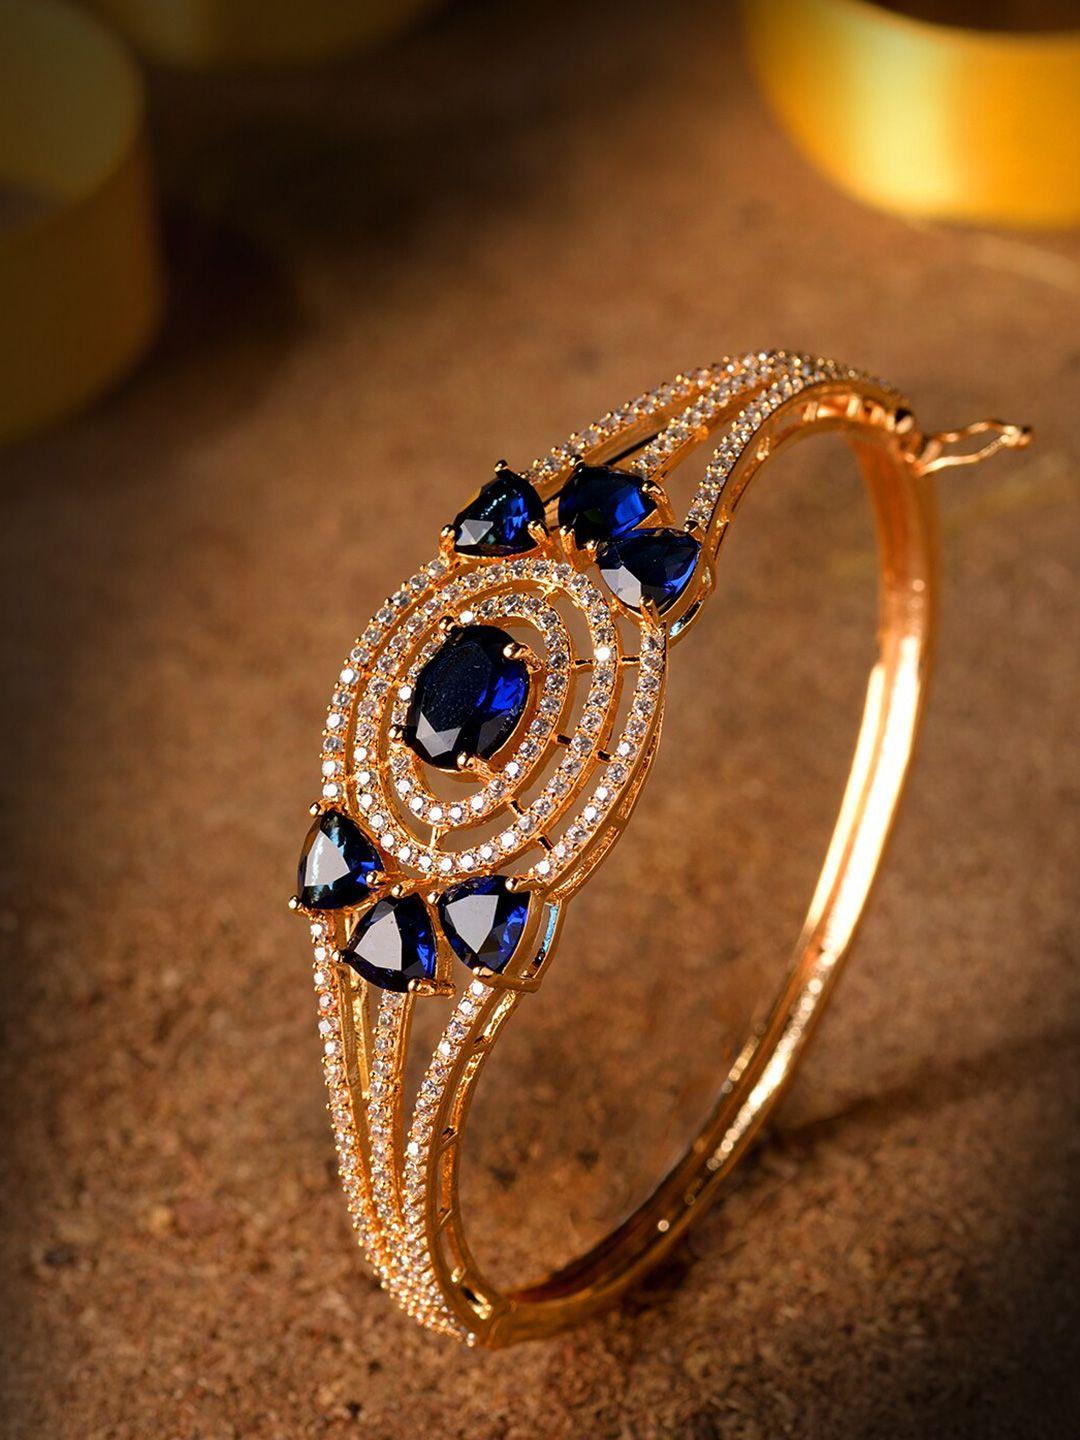 saraf rs jewellery gold-toned american diamond blue stone studded handcrafted bracelet